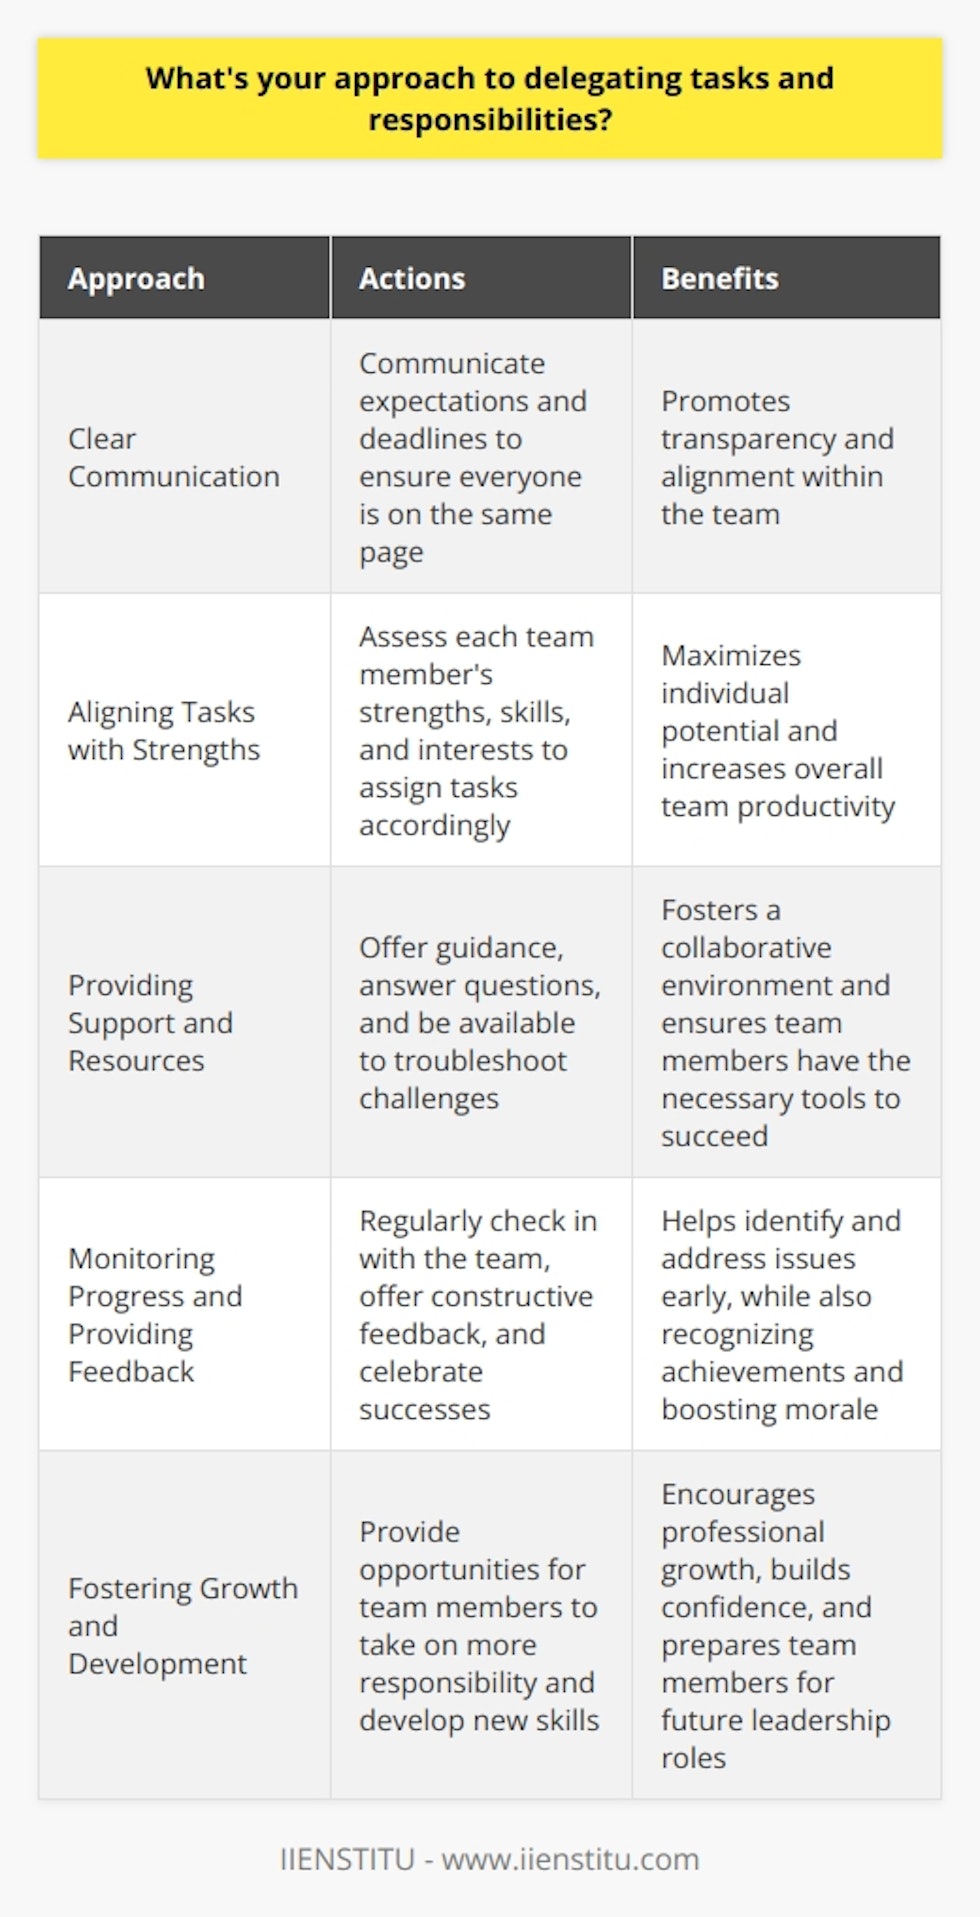 When it comes to delegating tasks and responsibilities, I believe in empowering team members to take ownership of their work. I start by clearly communicating expectations and deadlines to ensure everyone is on the same page. Then, I assess each team members strengths, skills, and interests to assign tasks that align with their abilities. Providing Support and Resources I make sure to provide the necessary resources and support for my team to succeed in their delegated tasks. This includes offering guidance, answering questions, and being available to troubleshoot any challenges that may arise. I encourage open communication and foster a collaborative environment where team members feel comfortable seeking help when needed. Monitoring Progress and Providing Feedback Throughout the process, I regularly check in with my team to monitor progress and offer constructive feedback. I believe in acknowledging achievements and celebrating successes along the way. If any issues or roadblocks emerge, I work closely with the team member to find solutions and make adjustments as necessary. Fostering Growth and Development Delegating tasks is not just about getting work done; its also an opportunity for team members to grow and develop new skills. I look for chances to challenge my team and provide them with opportunities to take on more responsibility. By trusting and empowering them, I help build their confidence and encourage professional growth. In my experience, effective delegation is about finding the right balance between providing guidance and allowing autonomy. Its a skill Ive honed over time, and Im always looking for ways to improve and adapt my approach to best support my team and achieve our goals together.